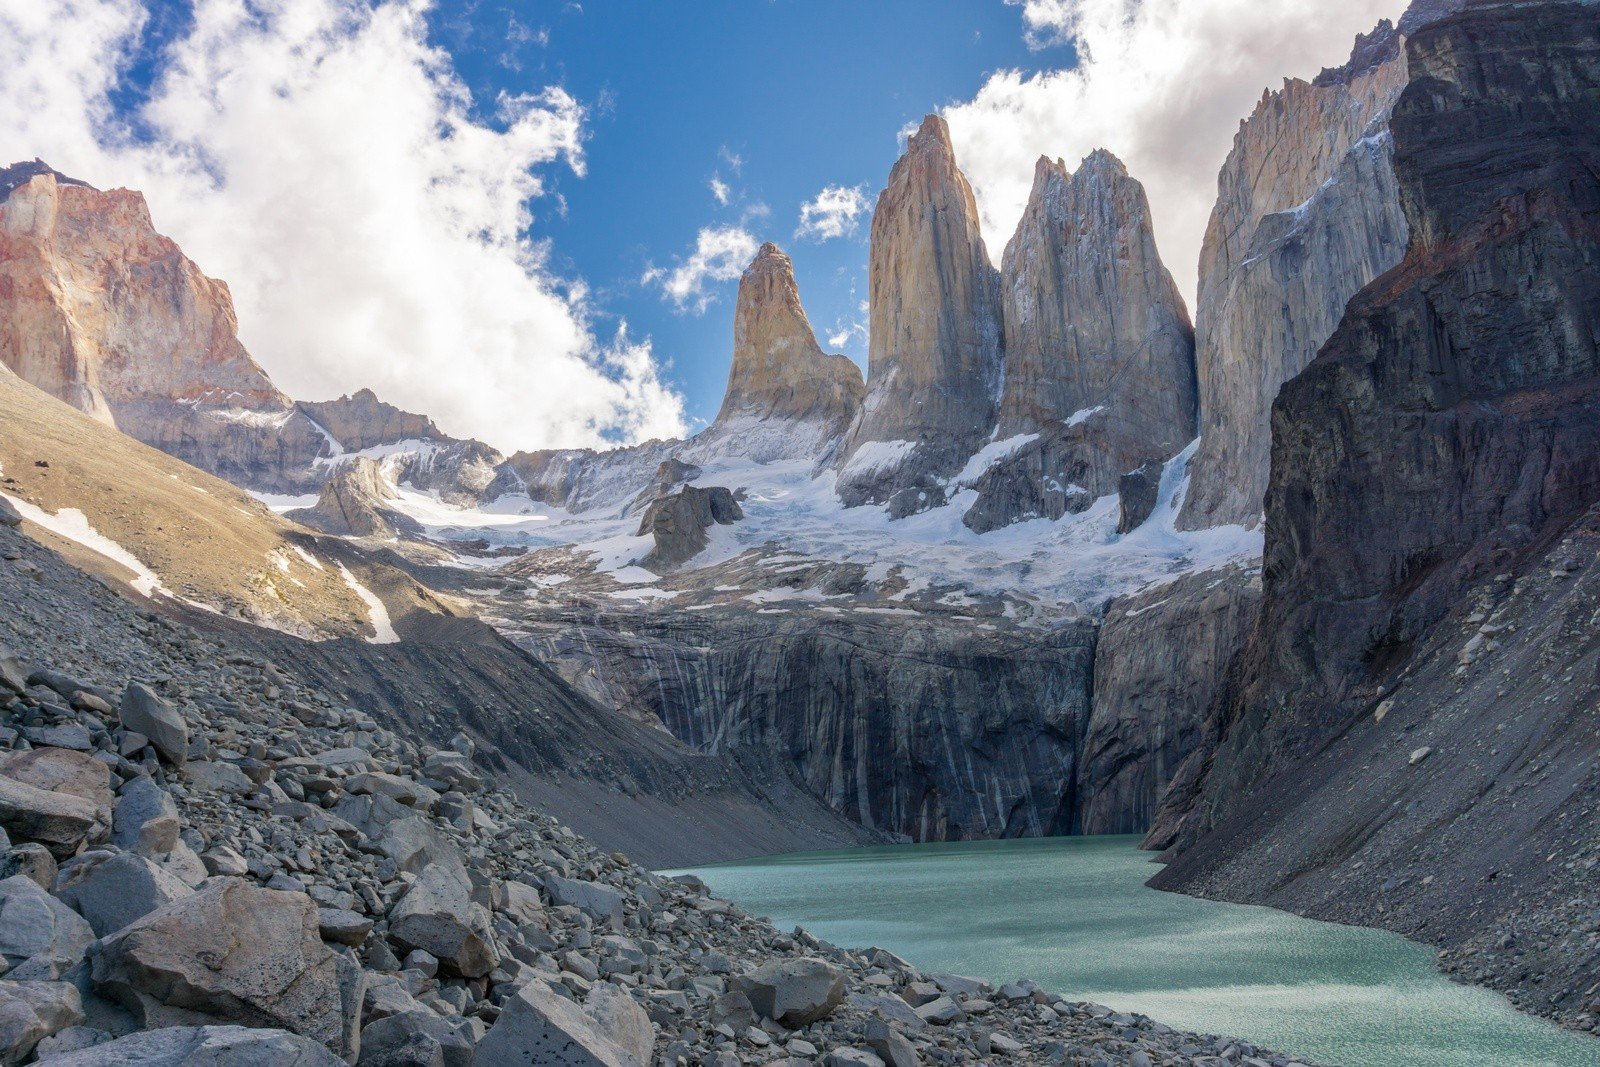 The famous spires of the Torres del Paine mountains, in Patagonia.